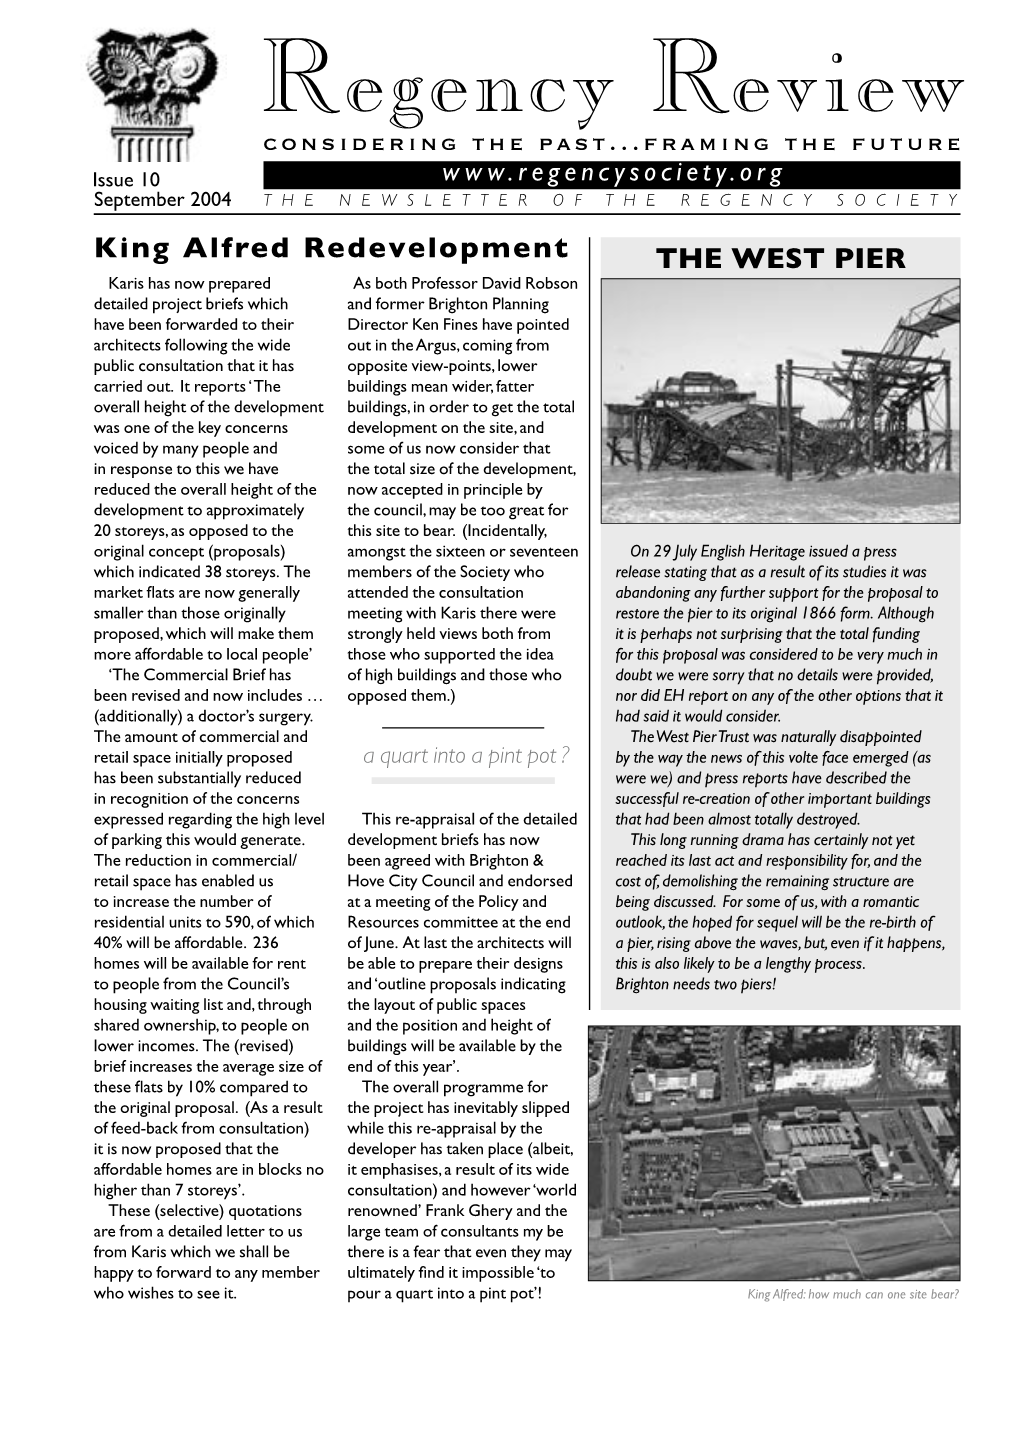 Regency Review Considering the Past...Framing the Future Issue 10 September 2004 the NEWSLETTER of the REGENCY SOCIETY